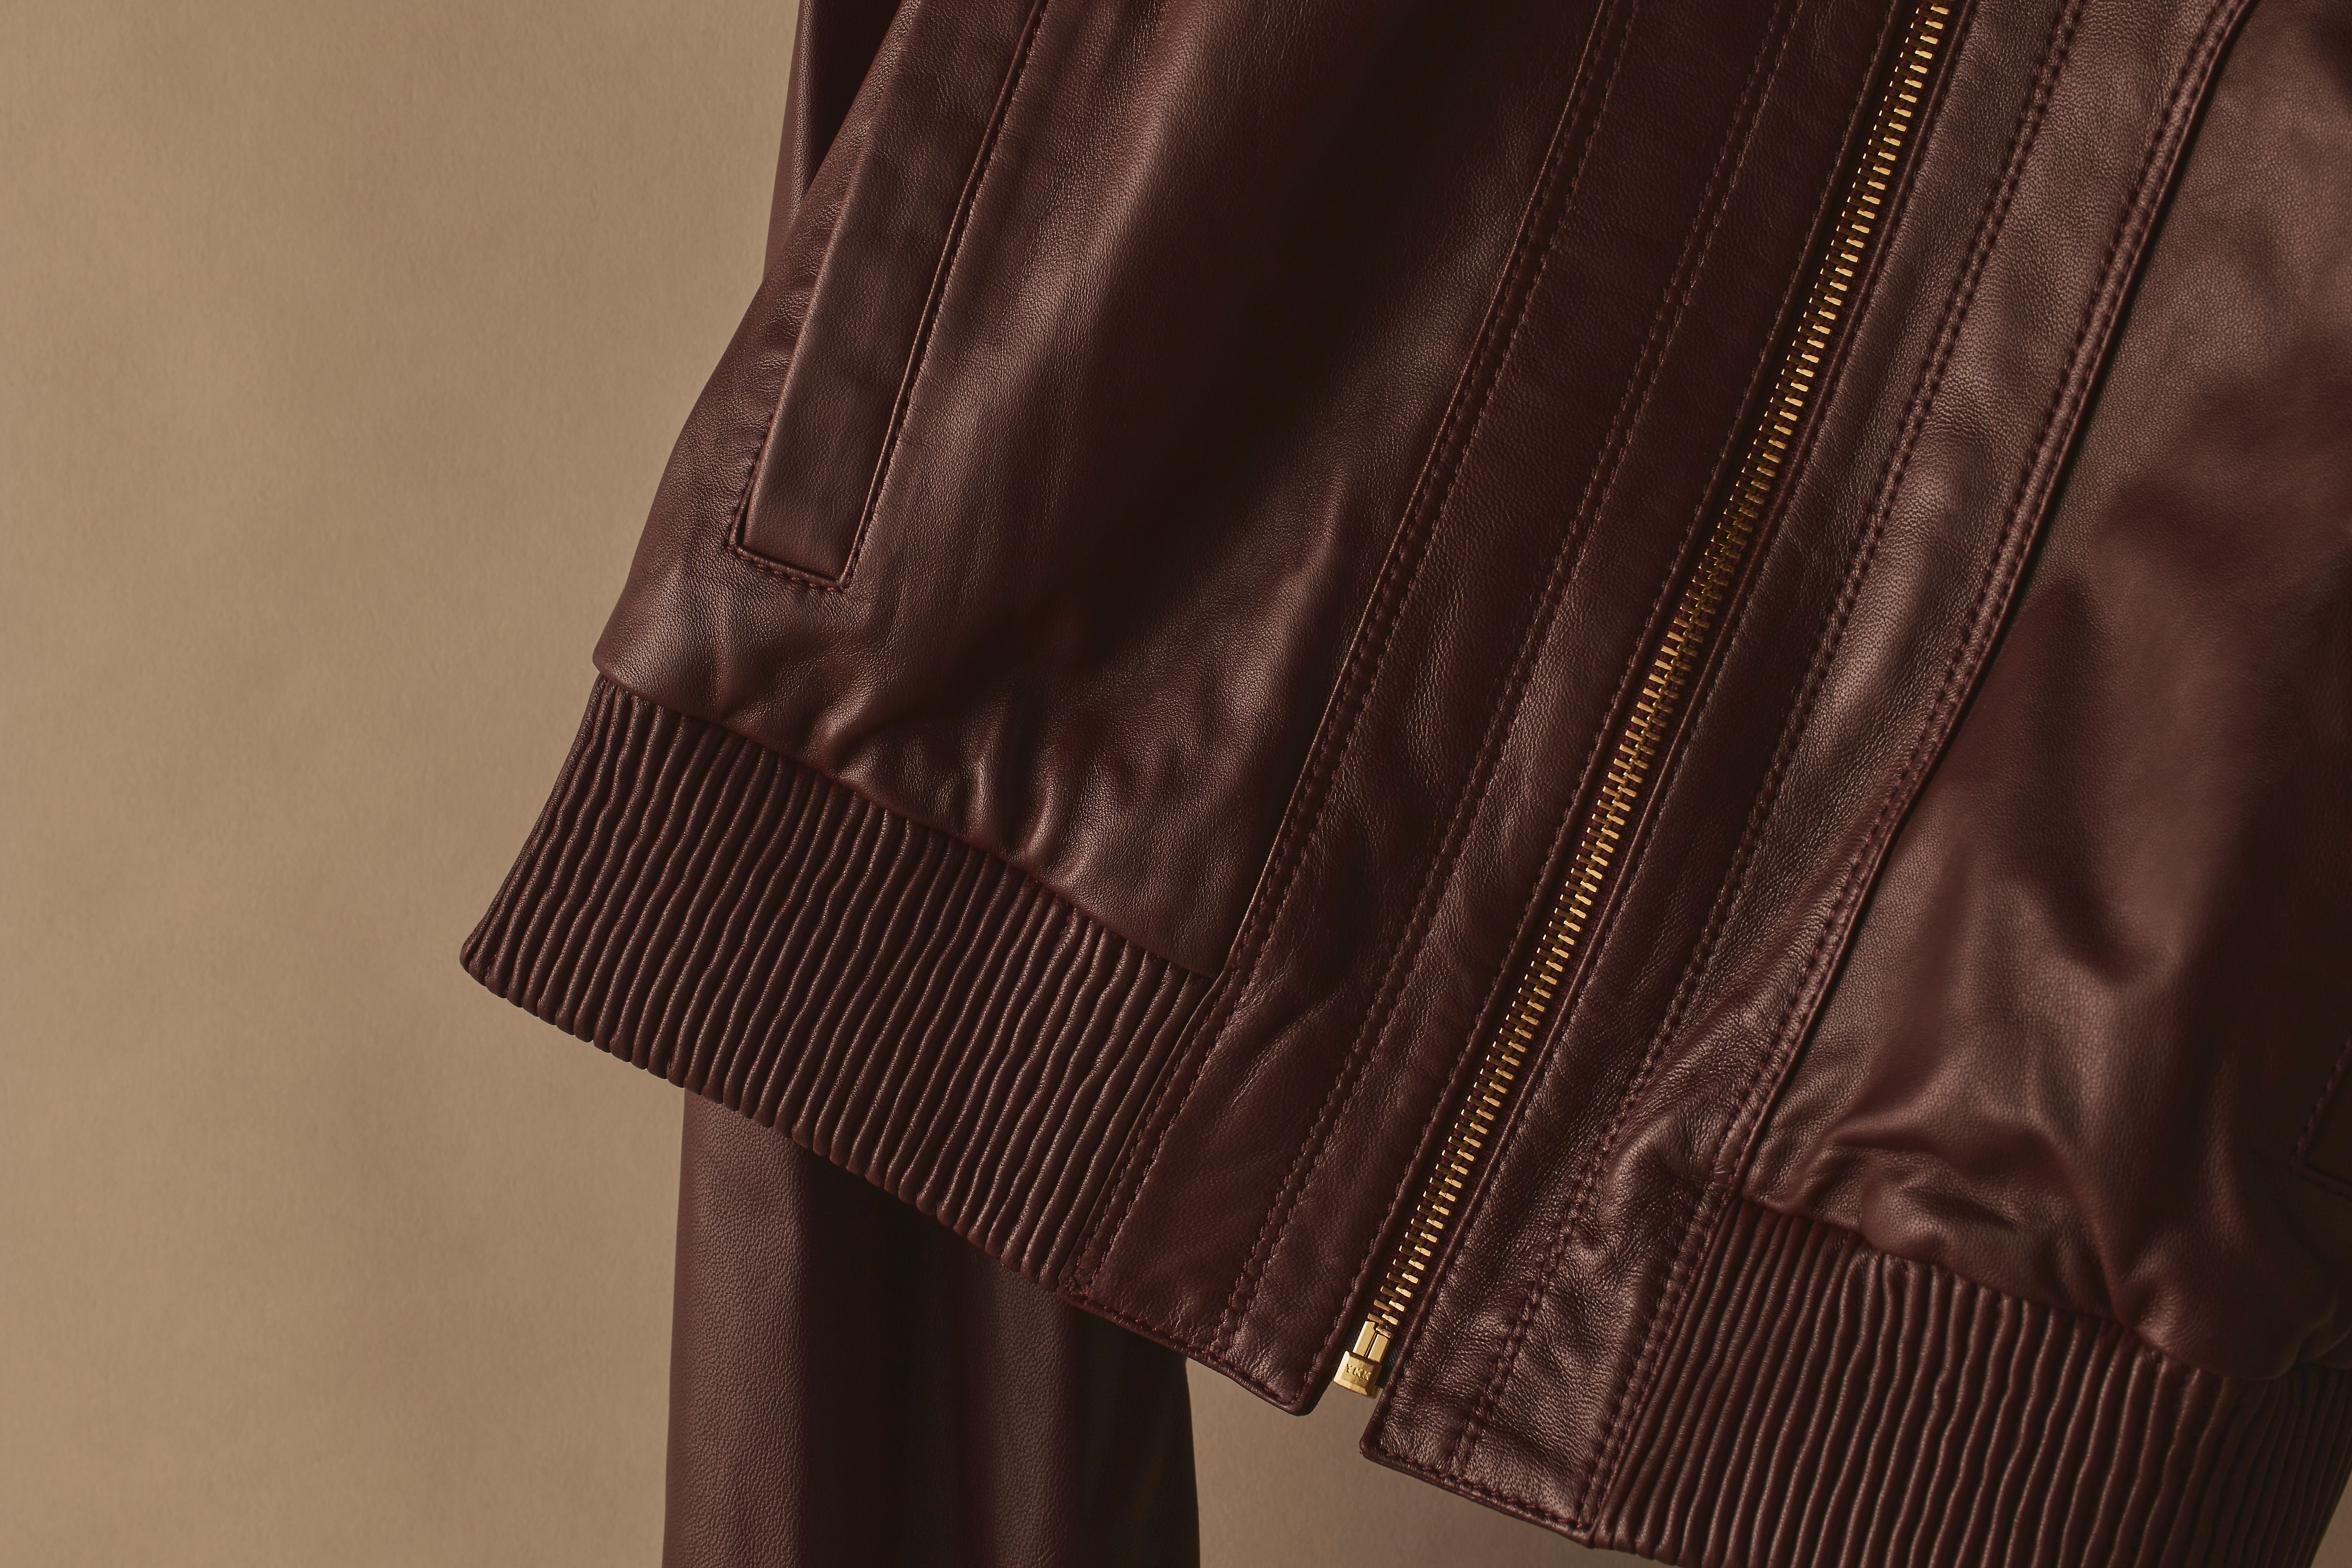 Scanlan Theodore leather bomber jacket with detailed view of zipper and elasticated trim.